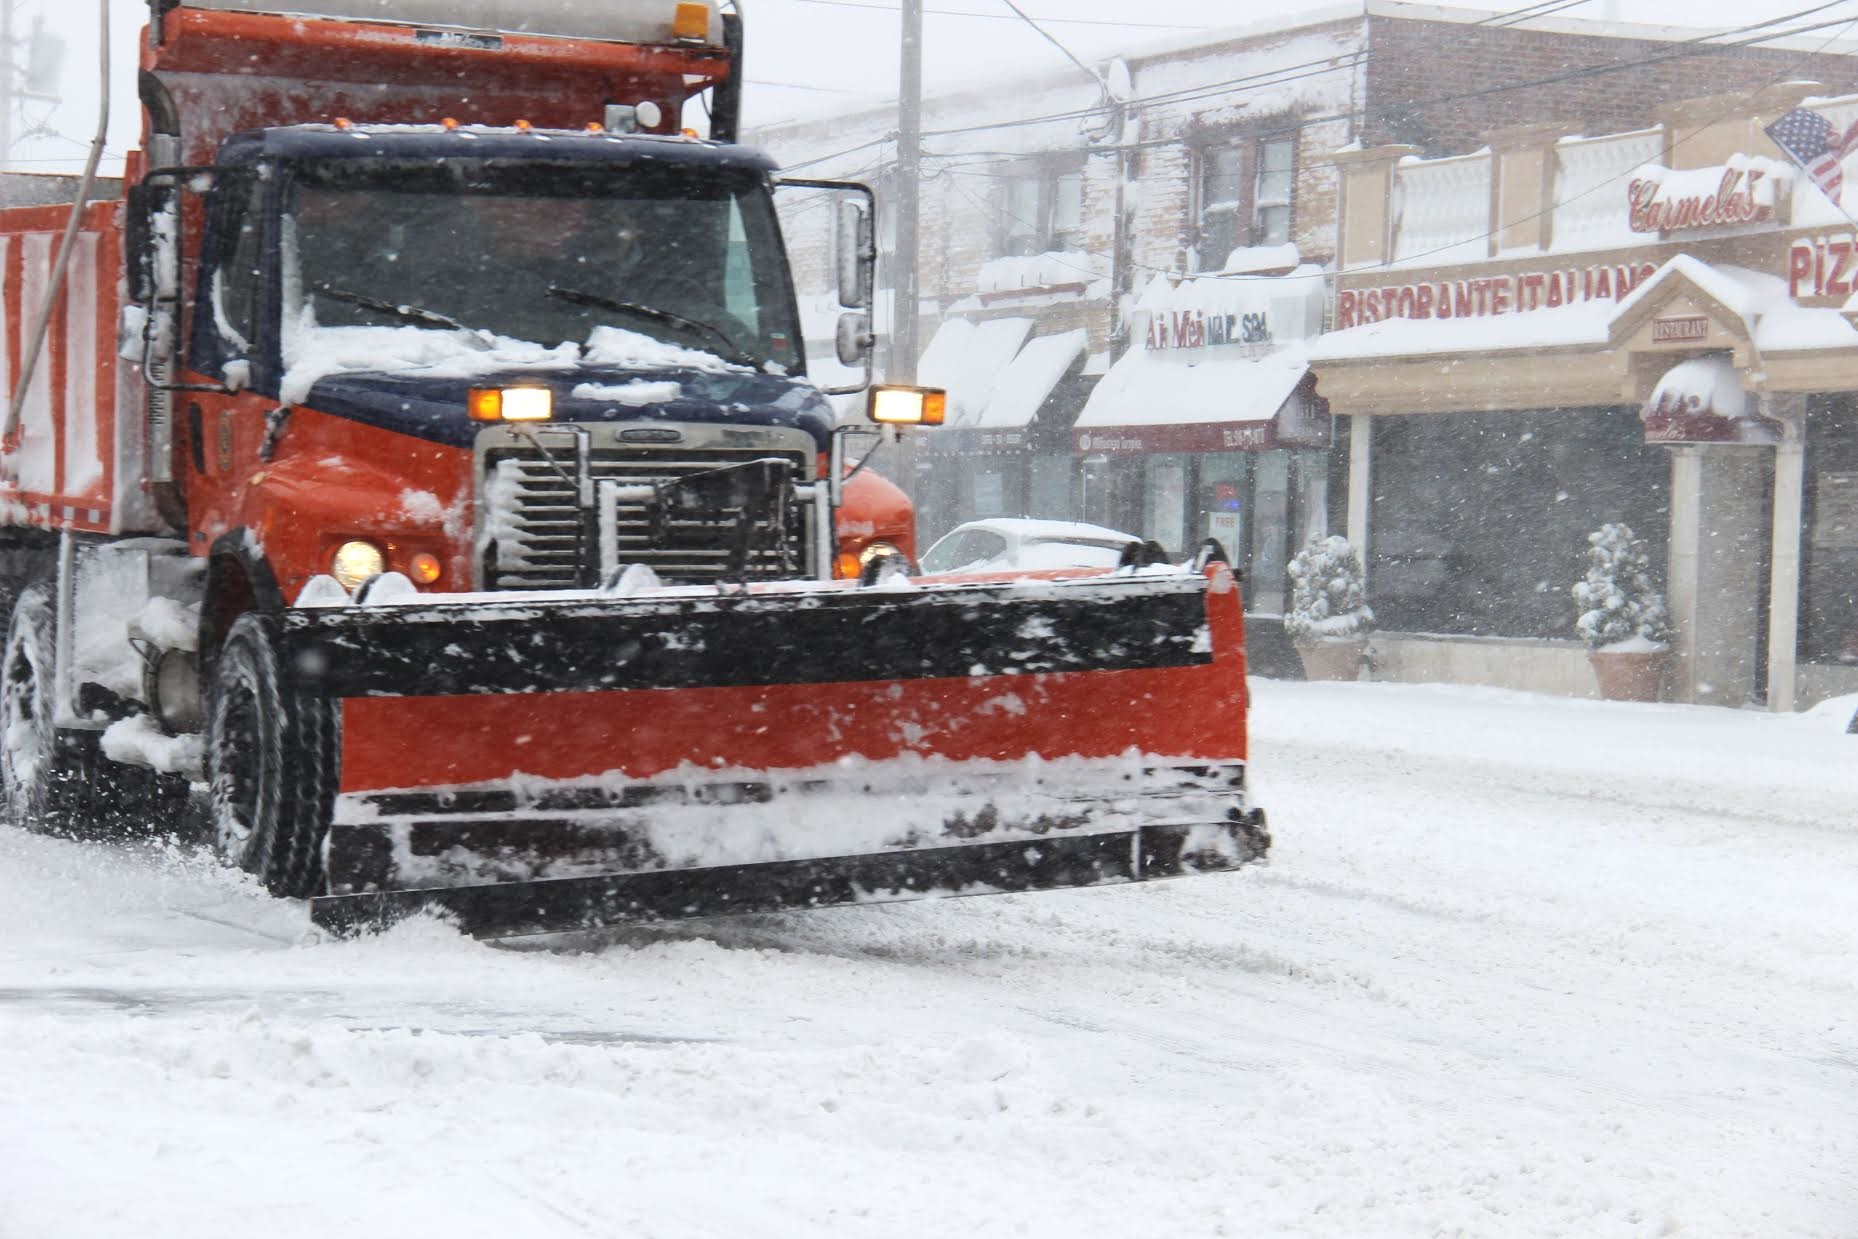 Plows continue to battle the snow fall despite the forecast which calls for continued accumulations late into tonight.